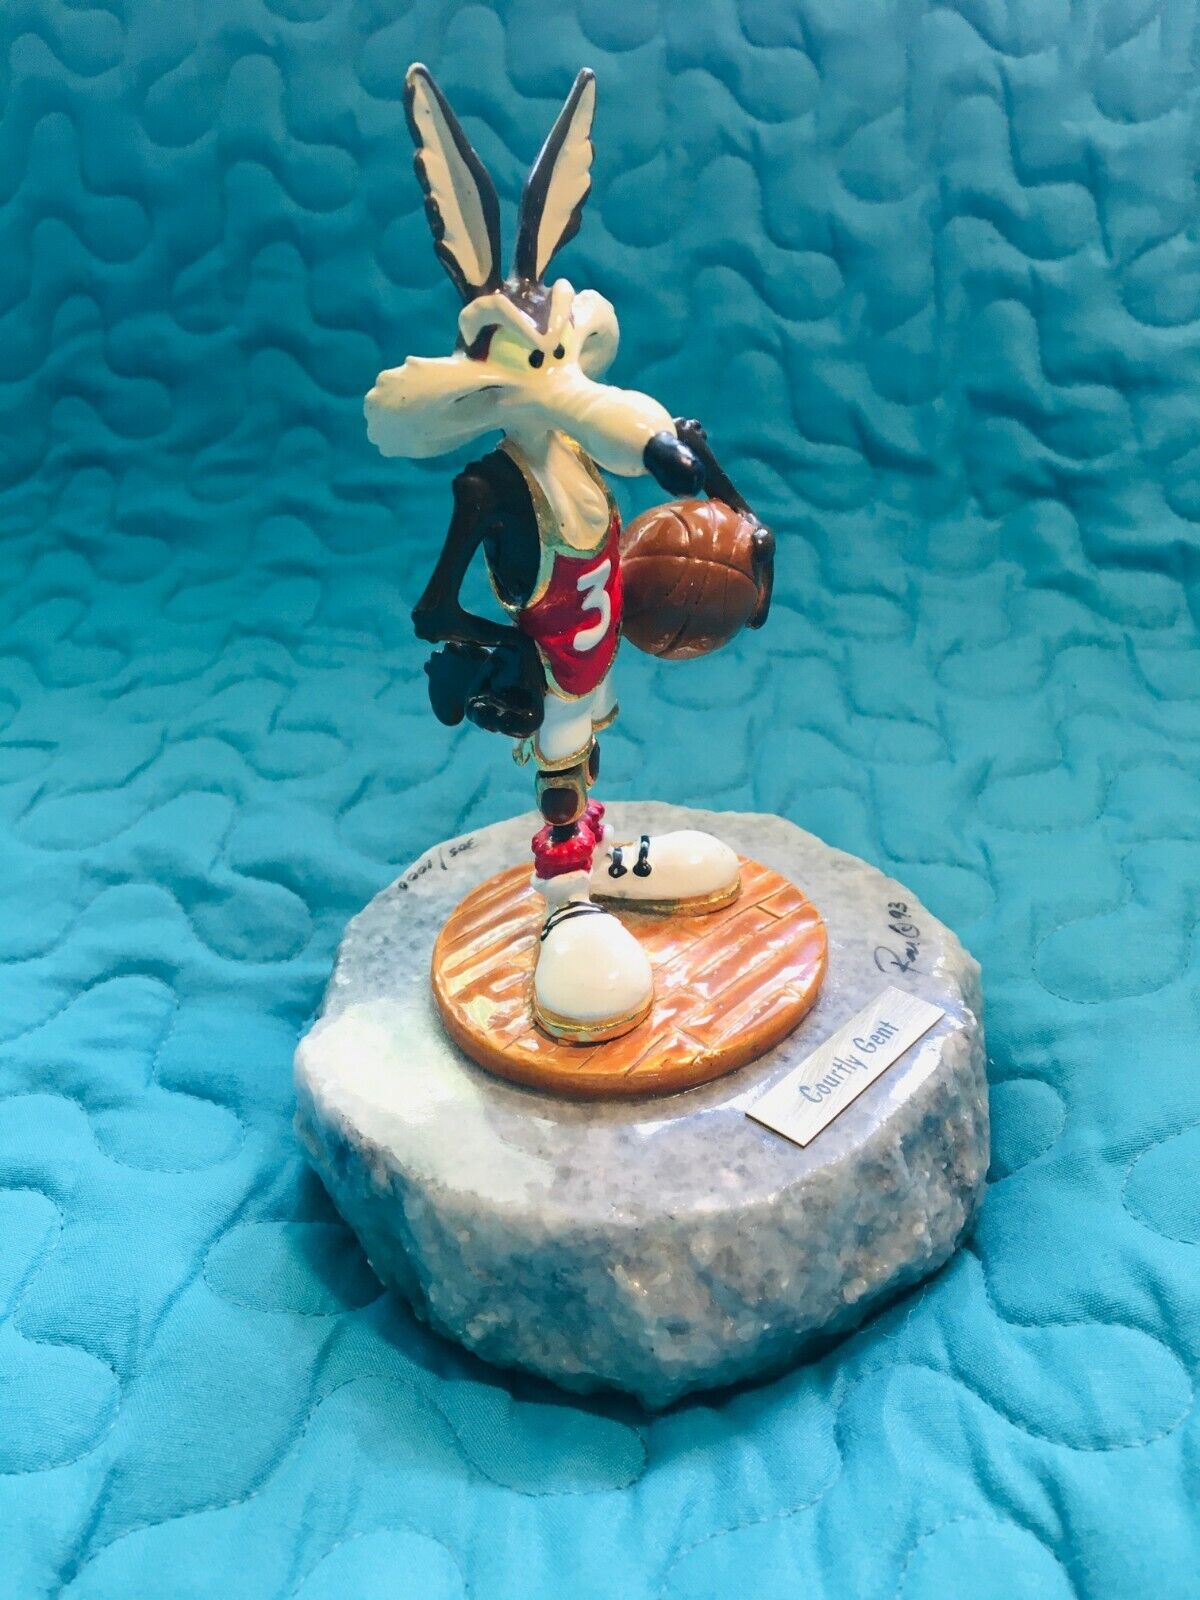 Warner Bros Wile E. Coyote Courtly Gent Basketball LE 1993 statue Ron Lee 305/1K